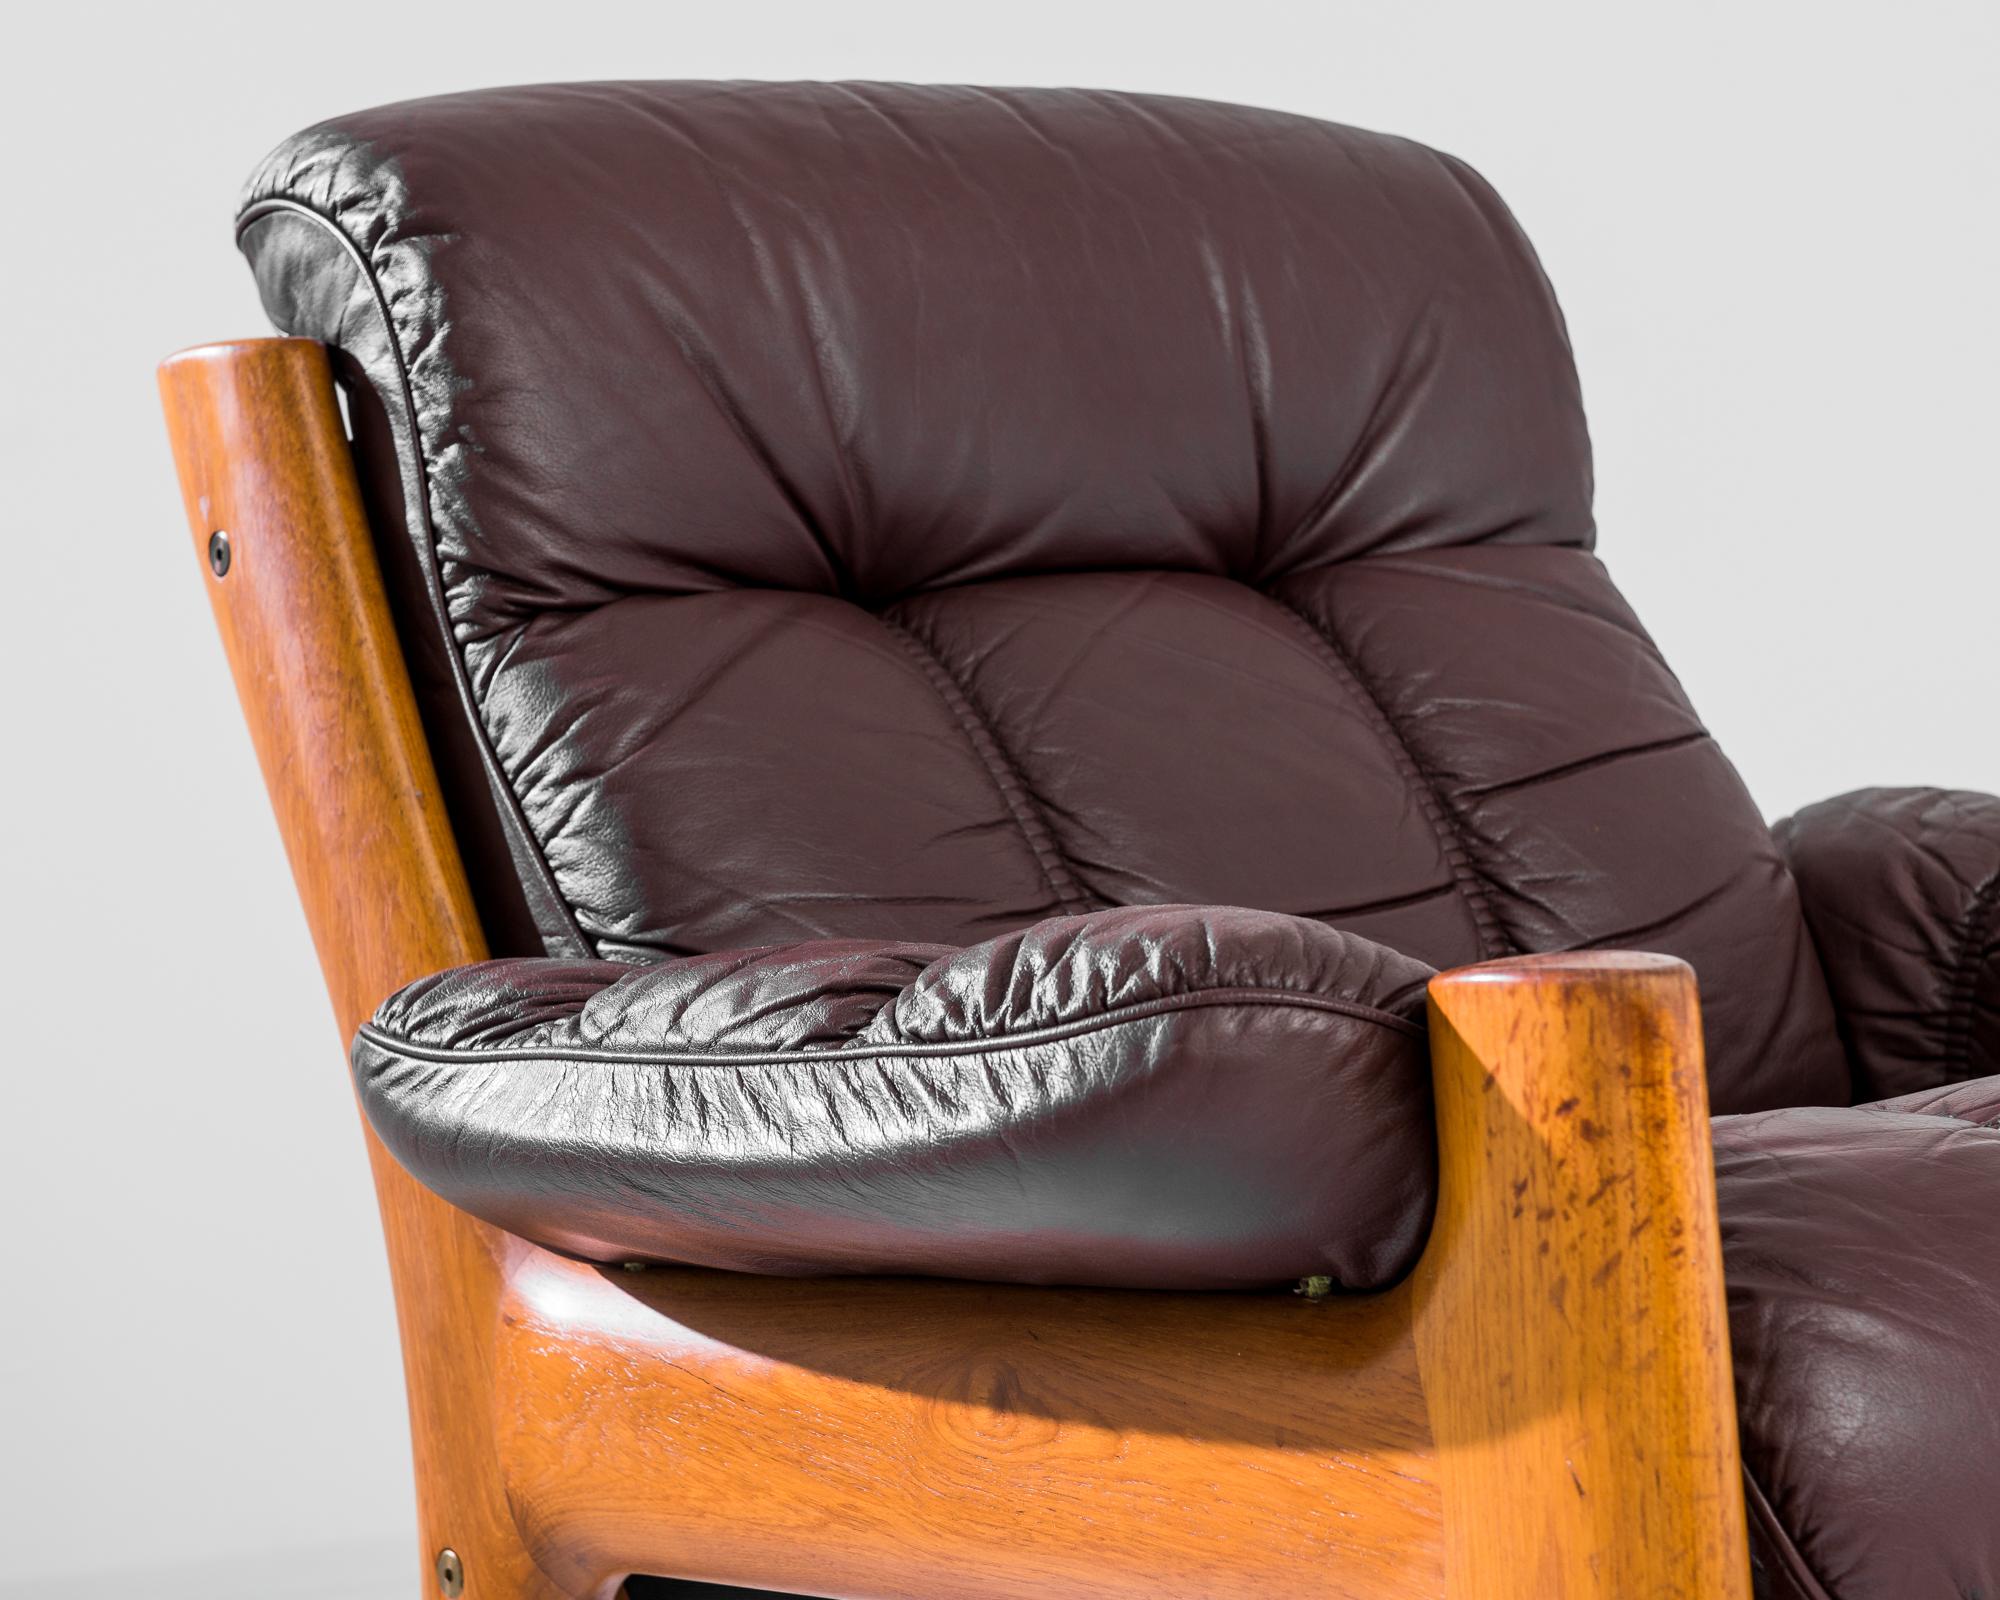 A 1970s armchair by Norwegian furniture designer Ekornes. Polished teak and deep oxblood leather offer a lively interplay of rich colors. The sophisticated segmentation of the upholstery creates an elegant seat, while the organic lines of the teak